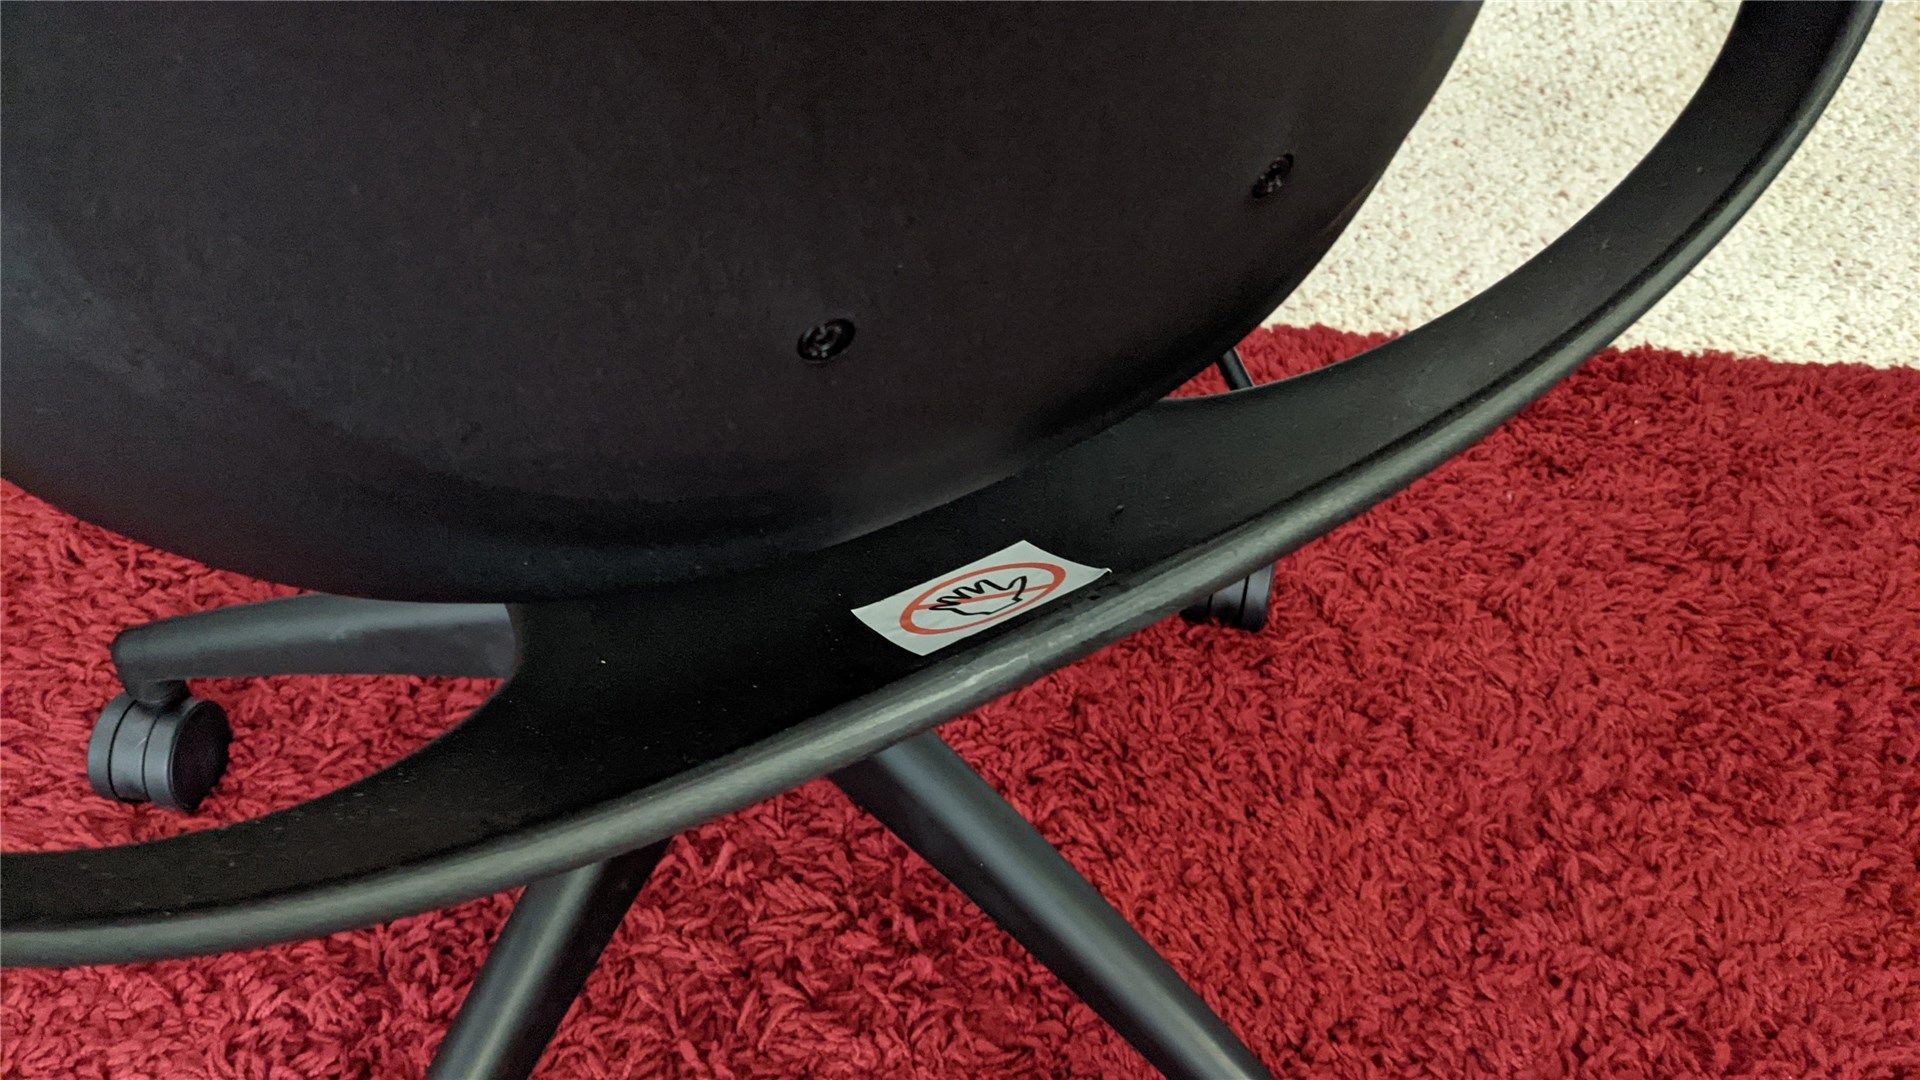 An image of the back of the chair showing where the smaller portion rocks